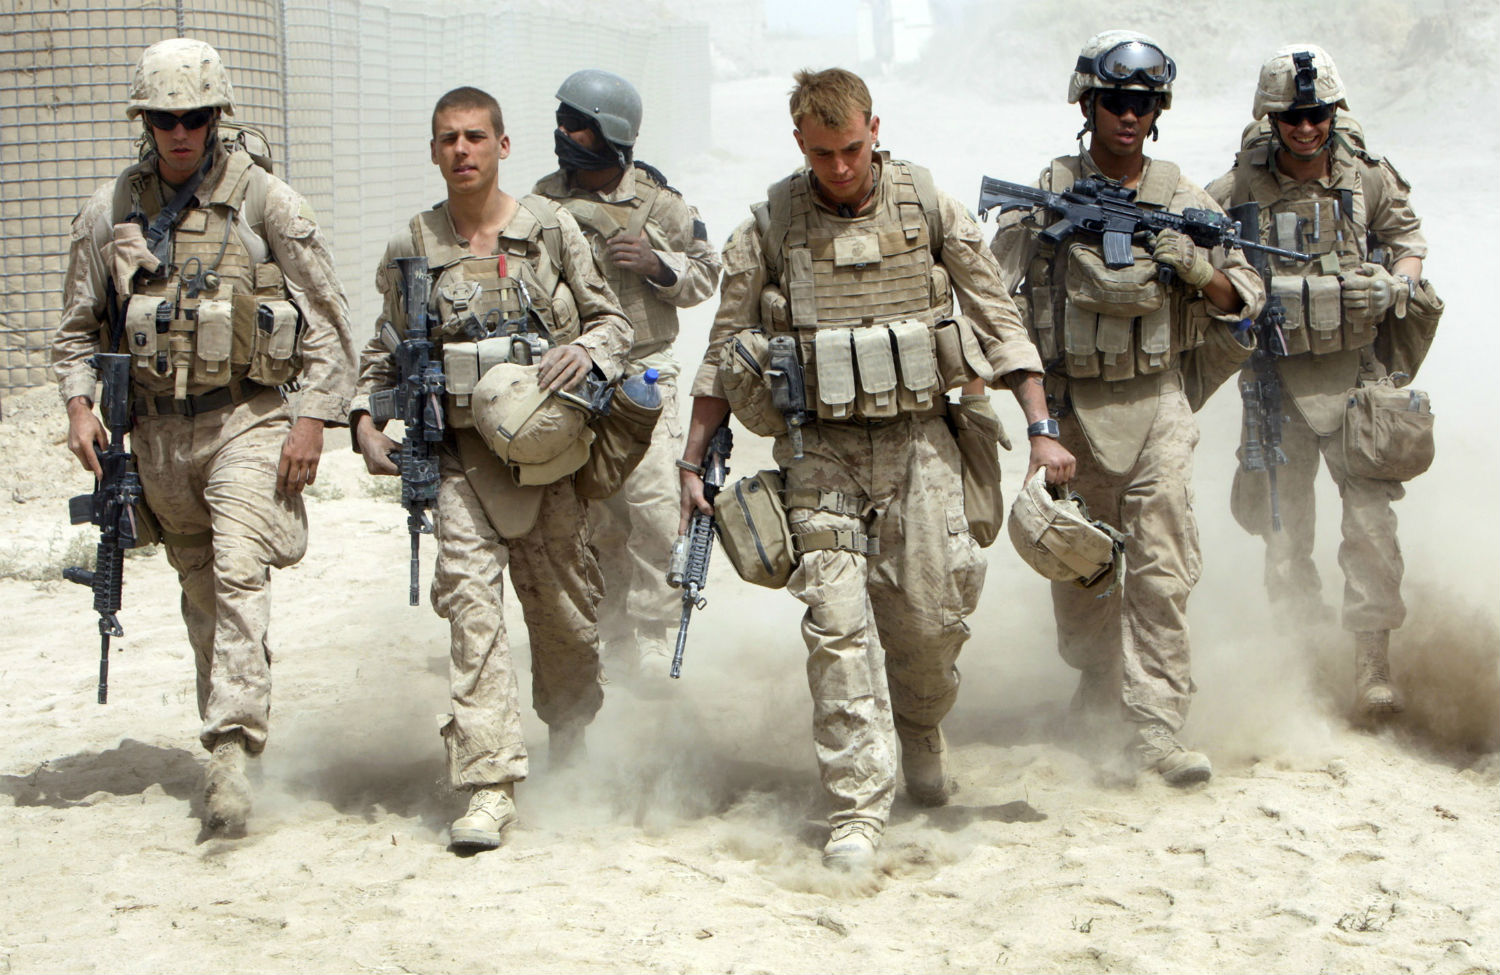 7 Reasons Why America’s Wars Aren’t Ending Anytime Soon